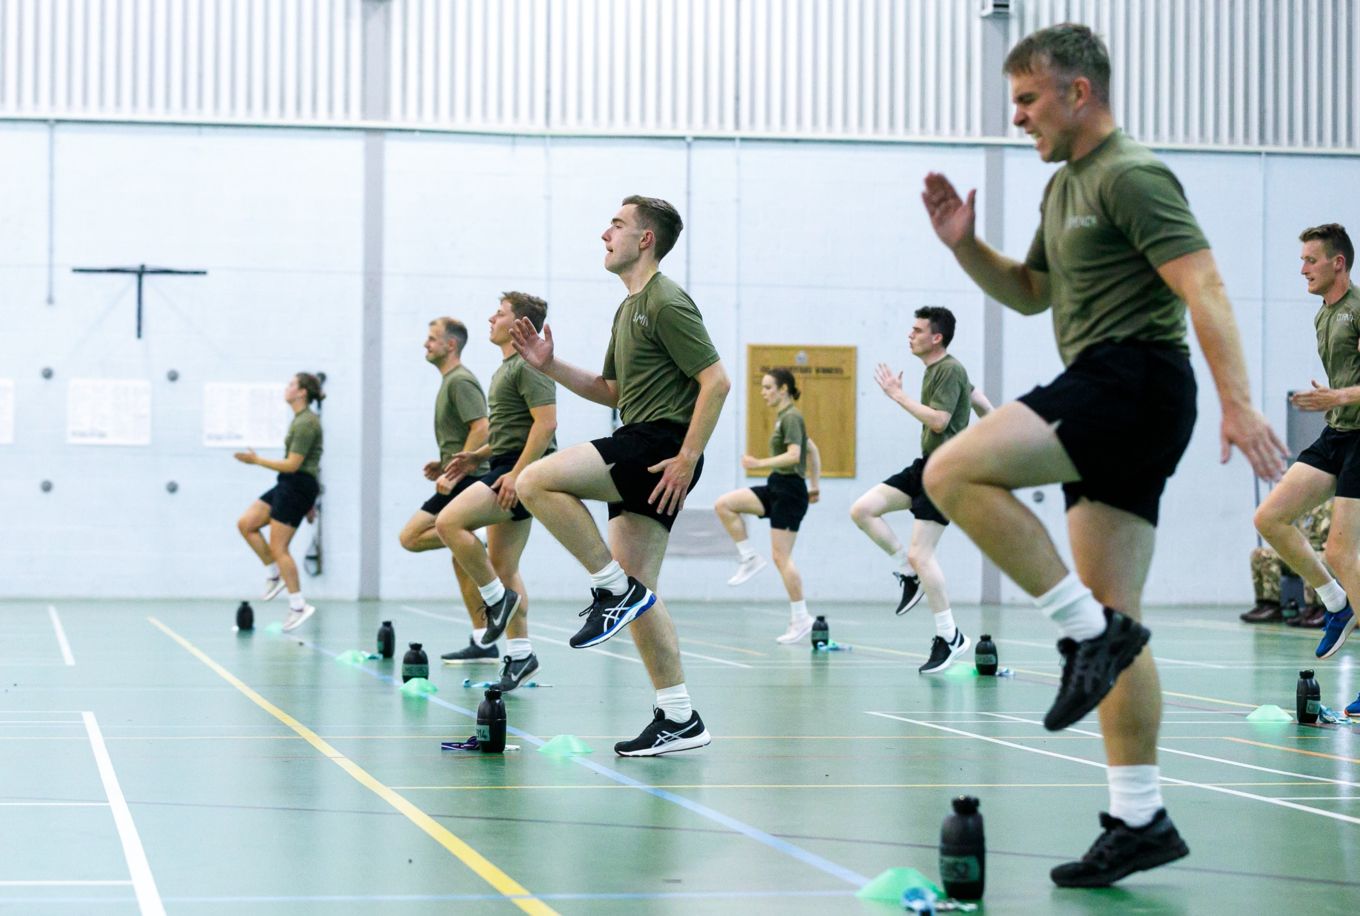 Personnel doing exercise in a gymnasium. 